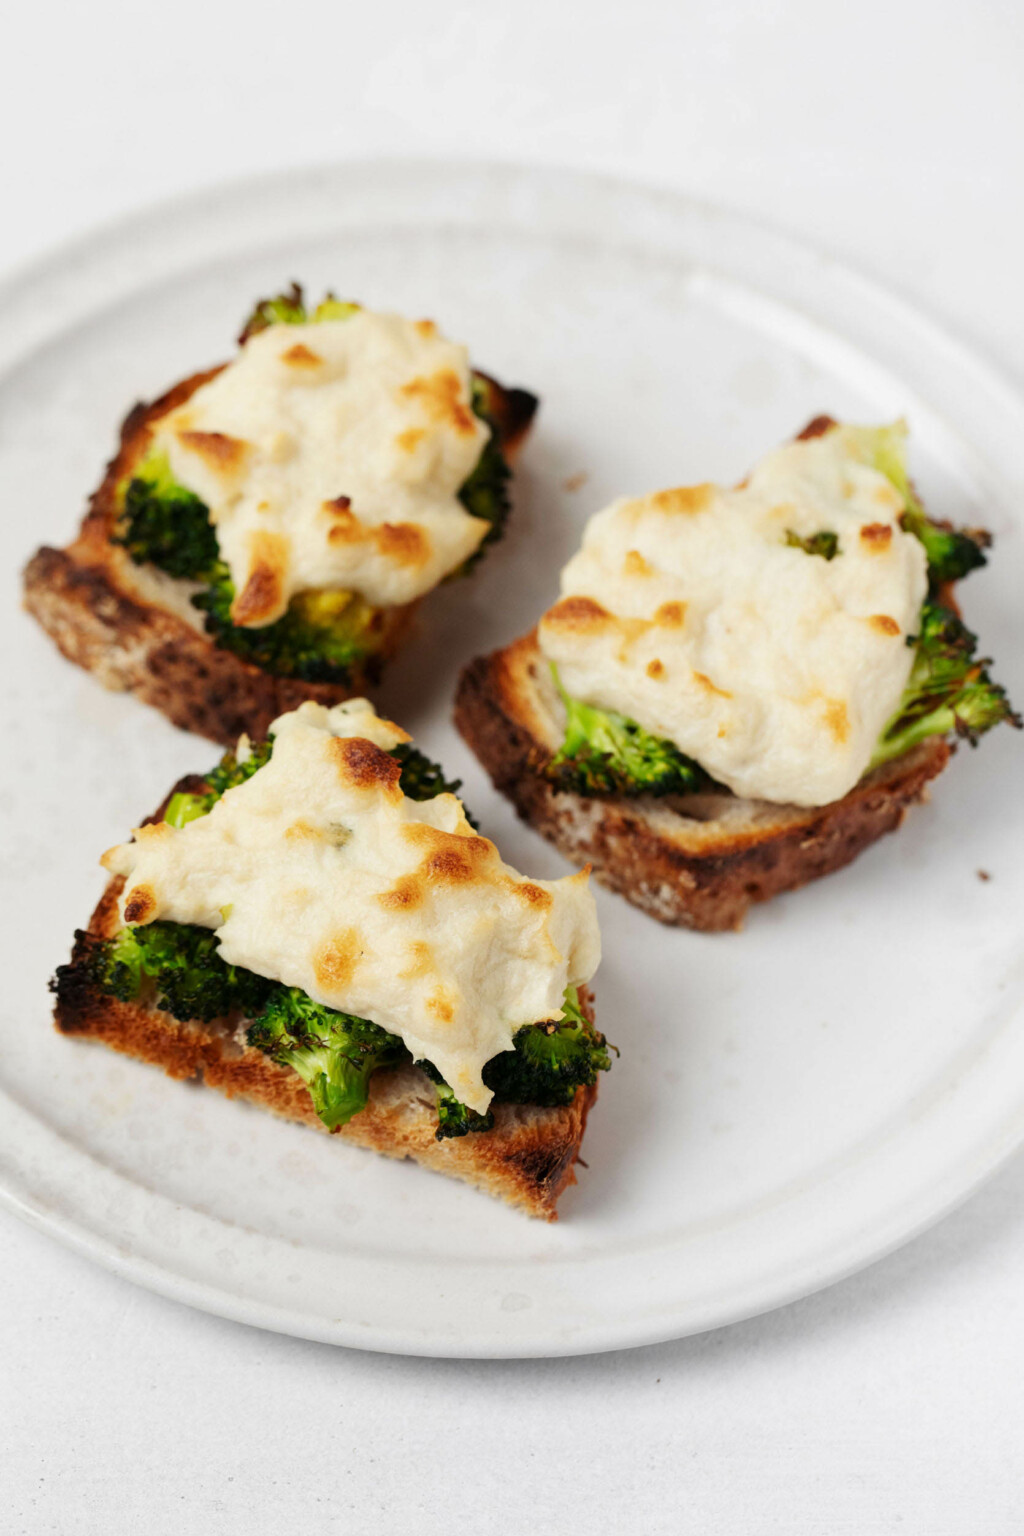 Three half-slices of vegan broccoli melts are laid out on a white, rimmed plate. The plate rests on a white surface.